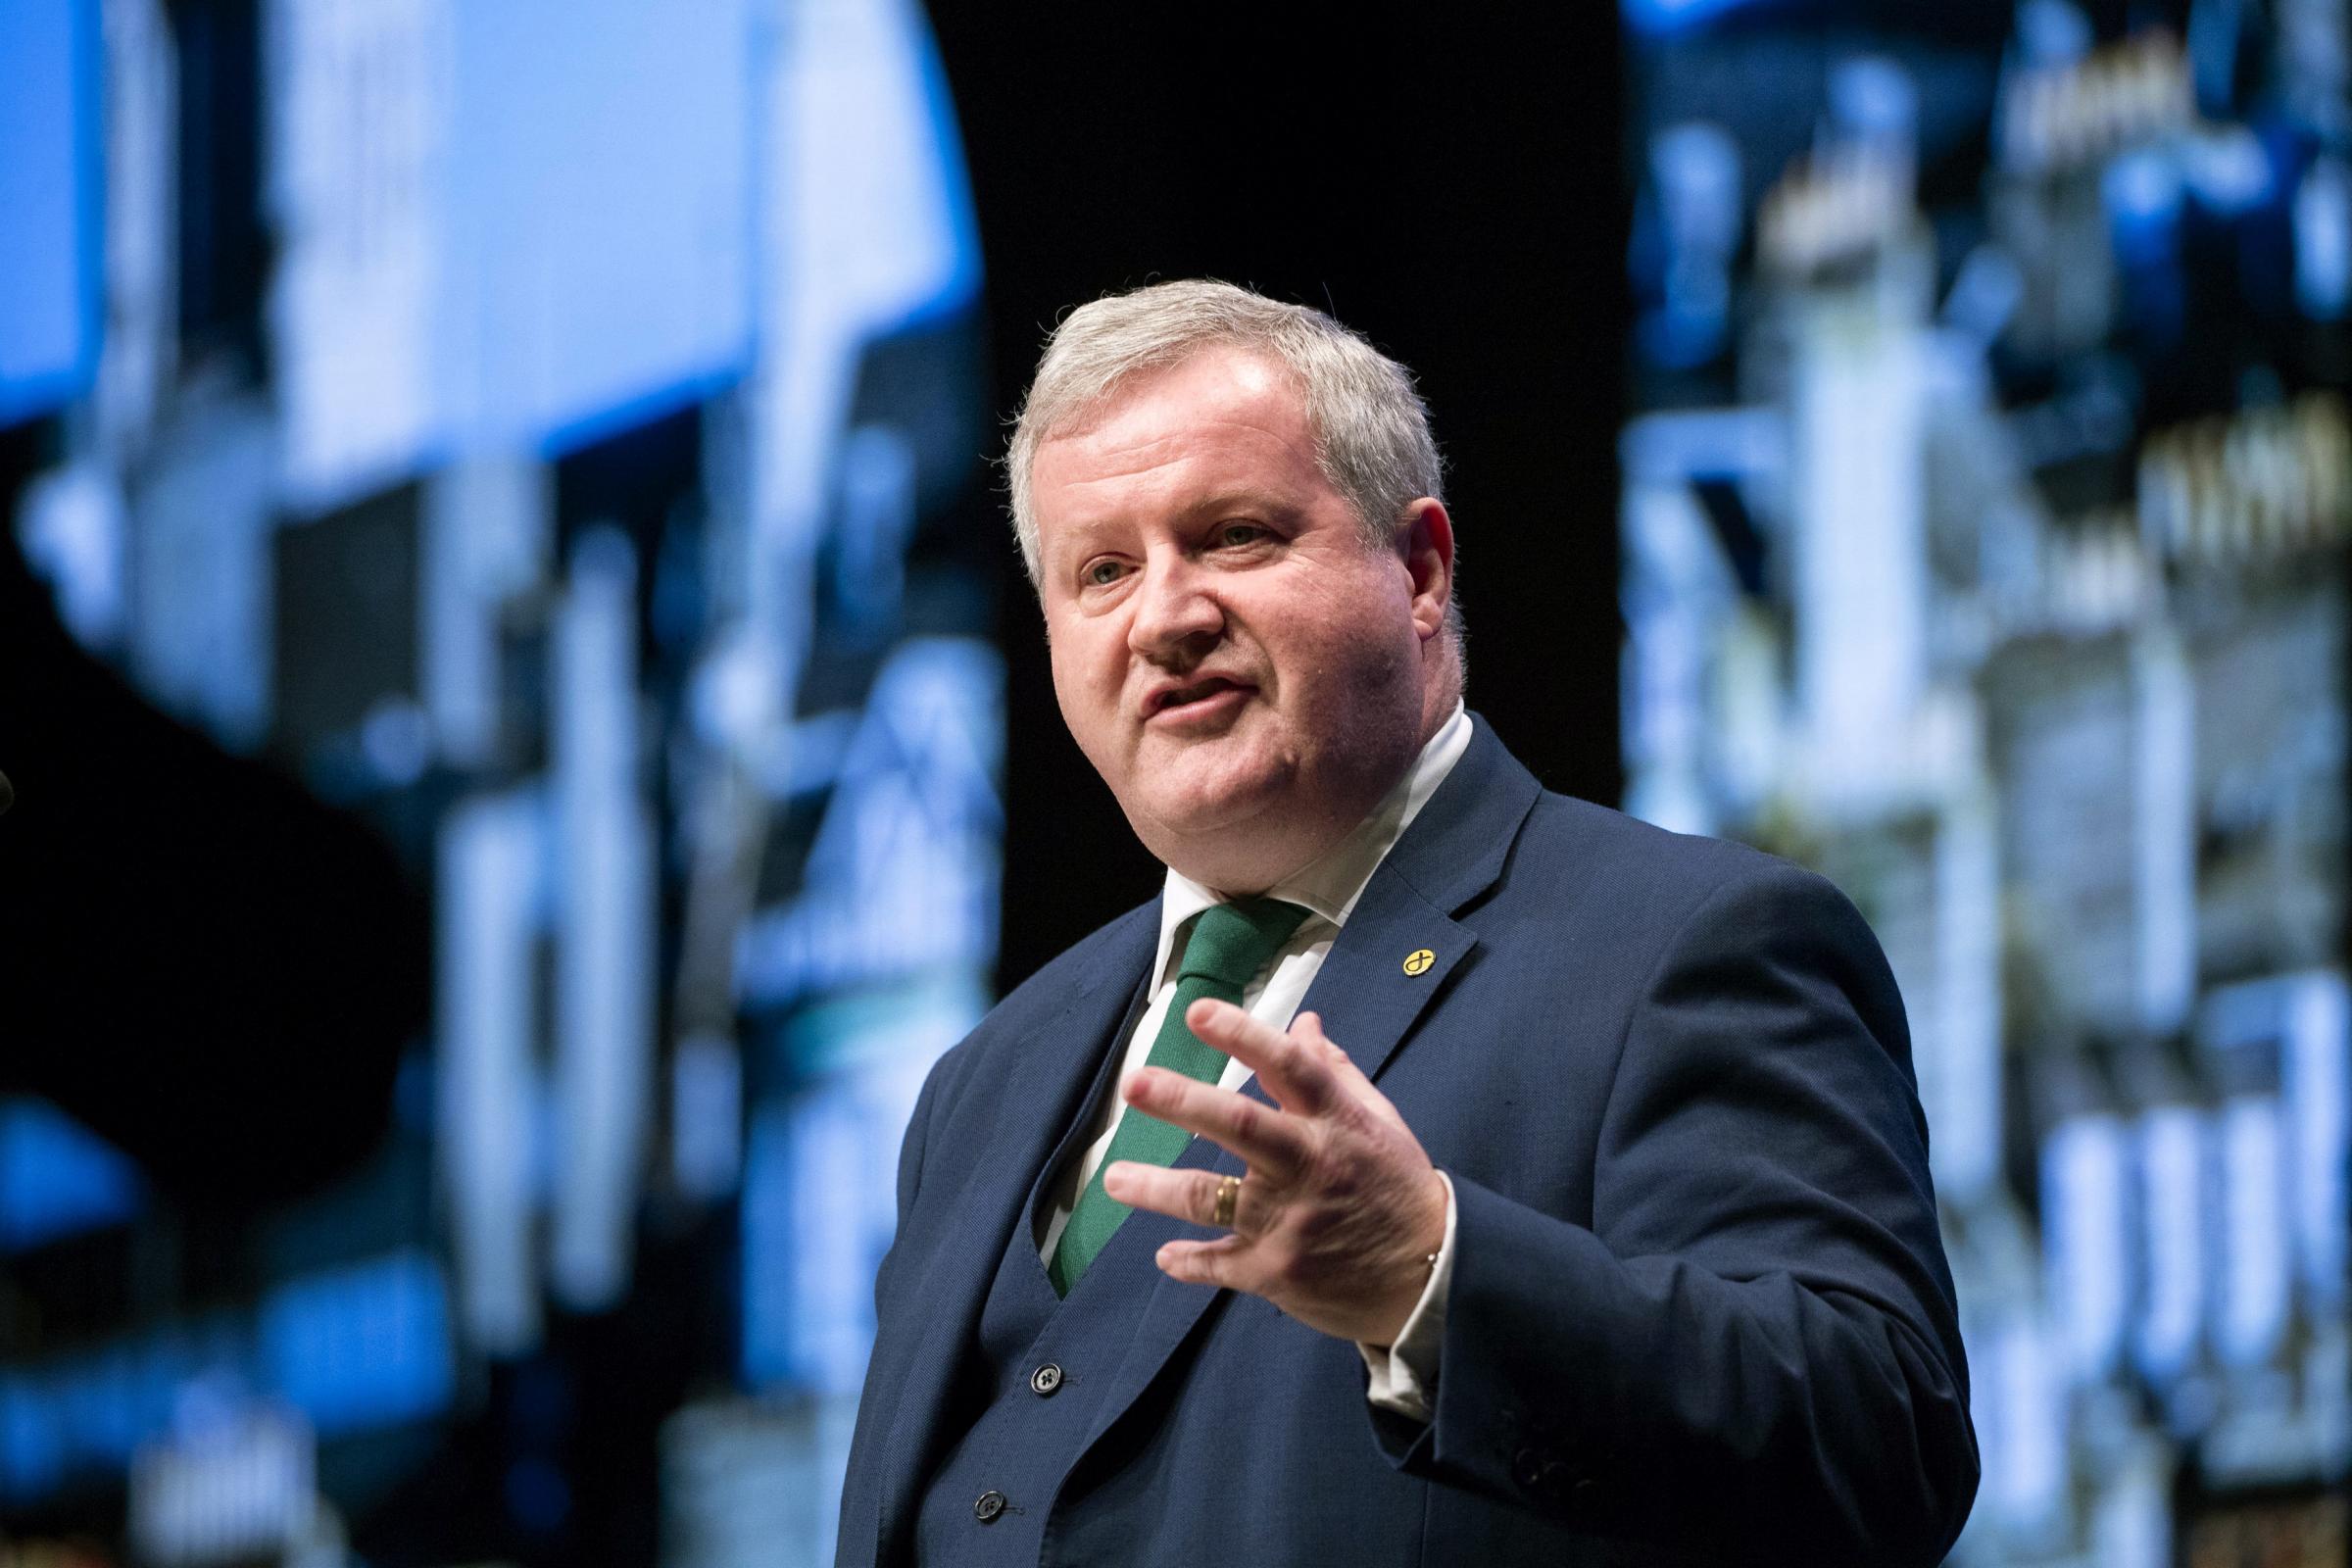 An independent Scotland could keep pound for years, Ian Blackford says